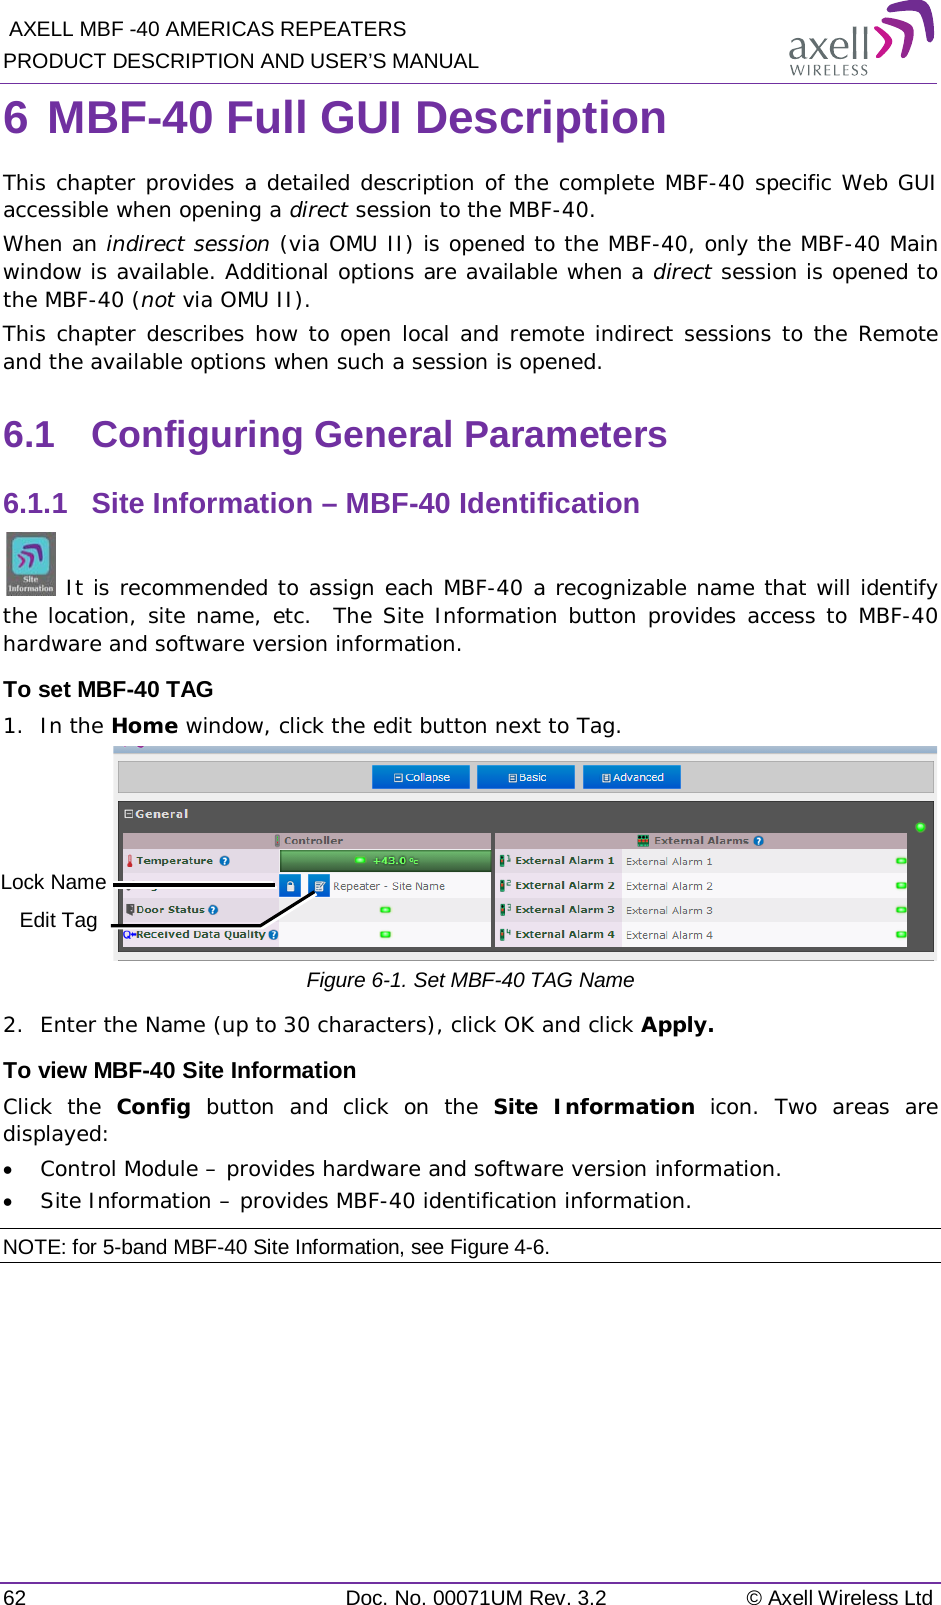  AXELL MBF -40 AMERICAS REPEATERS PRODUCT DESCRIPTION AND USER’S MANUAL 62 Doc. No. 00071UM Rev. 3.2 © Axell Wireless Ltd 6 MBF-40 Full GUI Description  This chapter provides a detailed description of the complete MBF-40 specific Web GUI accessible when opening a direct session to the MBF-40.  When an indirect session (via OMU II) is opened to the MBF-40, only the MBF-40 Main window is available. Additional options are available when a direct session is opened to the MBF-40 (not via OMU II).  This chapter describes how to open local and remote indirect sessions to the Remote and the available options when such a session is opened. 6.1  Configuring General Parameters 6.1.1  Site Information – MBF-40 Identification  It is recommended to assign each MBF-40 a recognizable name that will identify the location, site name, etc.  The Site Information button provides access to MBF-40 hardware and software version information. To set MBF-40 TAG 1.  In the Home window, click the edit button next to Tag.  Figure  6-1. Set MBF-40 TAG Name 2.  Enter the Name (up to 30 characters), click OK and click Apply. To view MBF-40 Site Information Click the Config button and click on the Site Information  icon. Two areas are displayed: • Control Module – provides hardware and software version information. • Site Information – provides MBF-40 identification information.  NOTE: for 5-band MBF-40 Site Information, see Figure  4-6.  Edit Tag Lock Name 